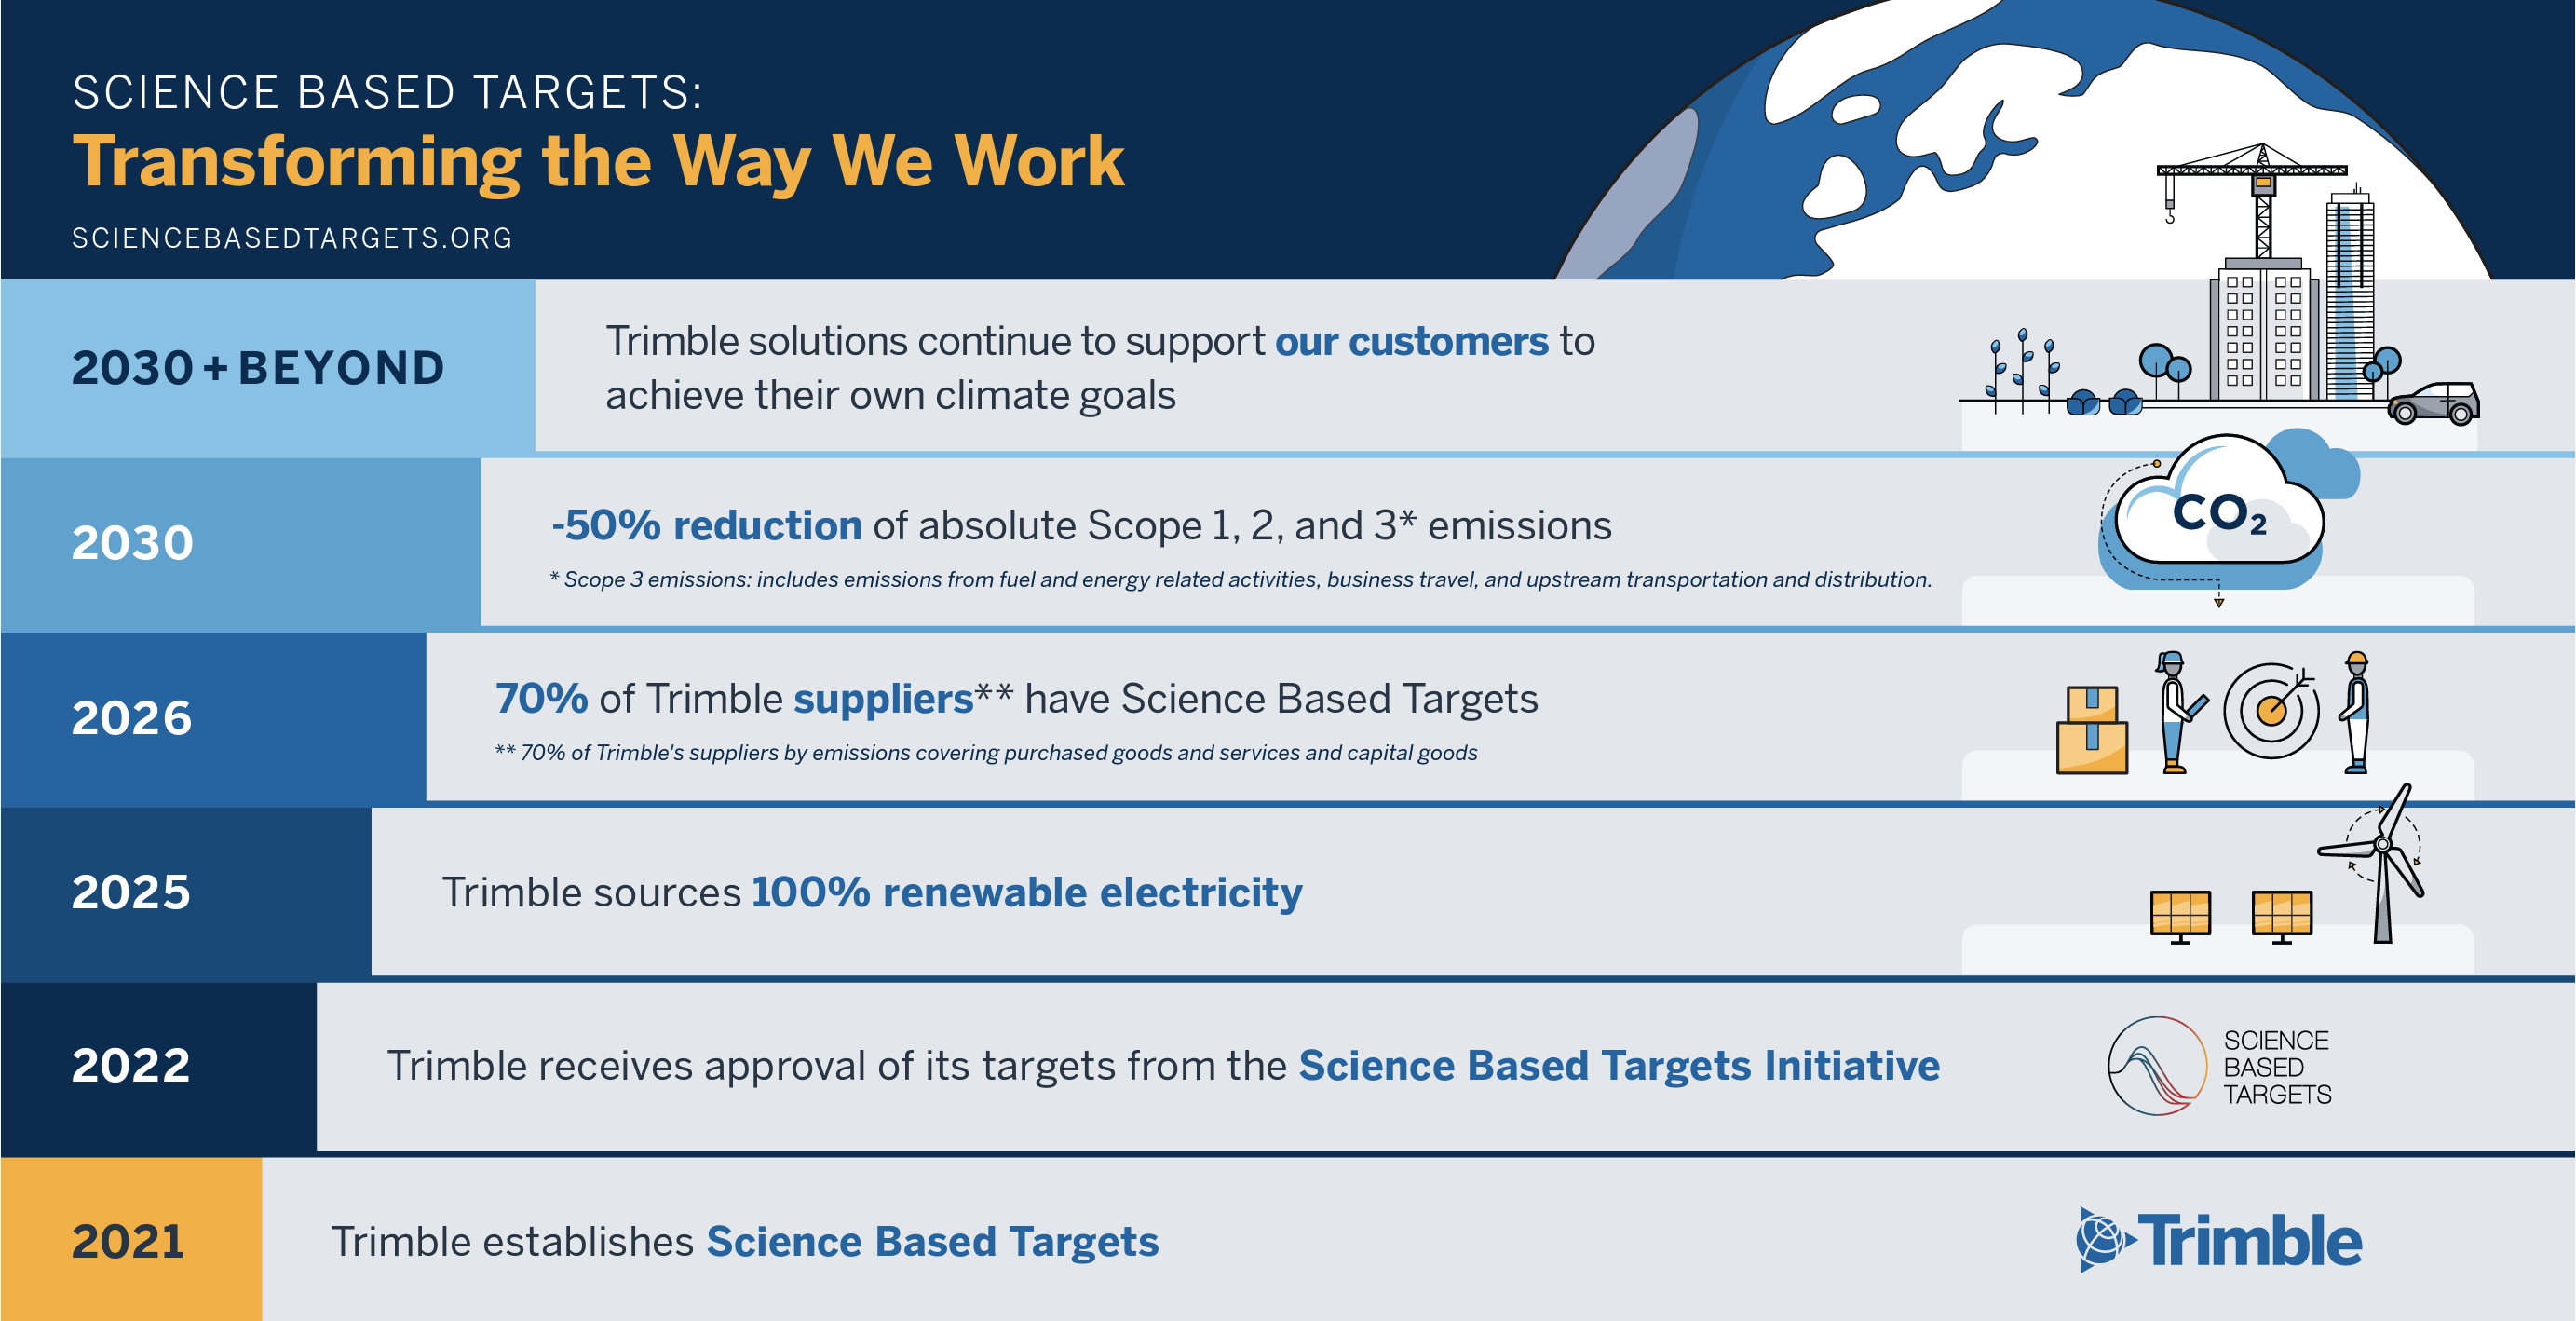 Trimble's science-based targets for sustainability and climate.